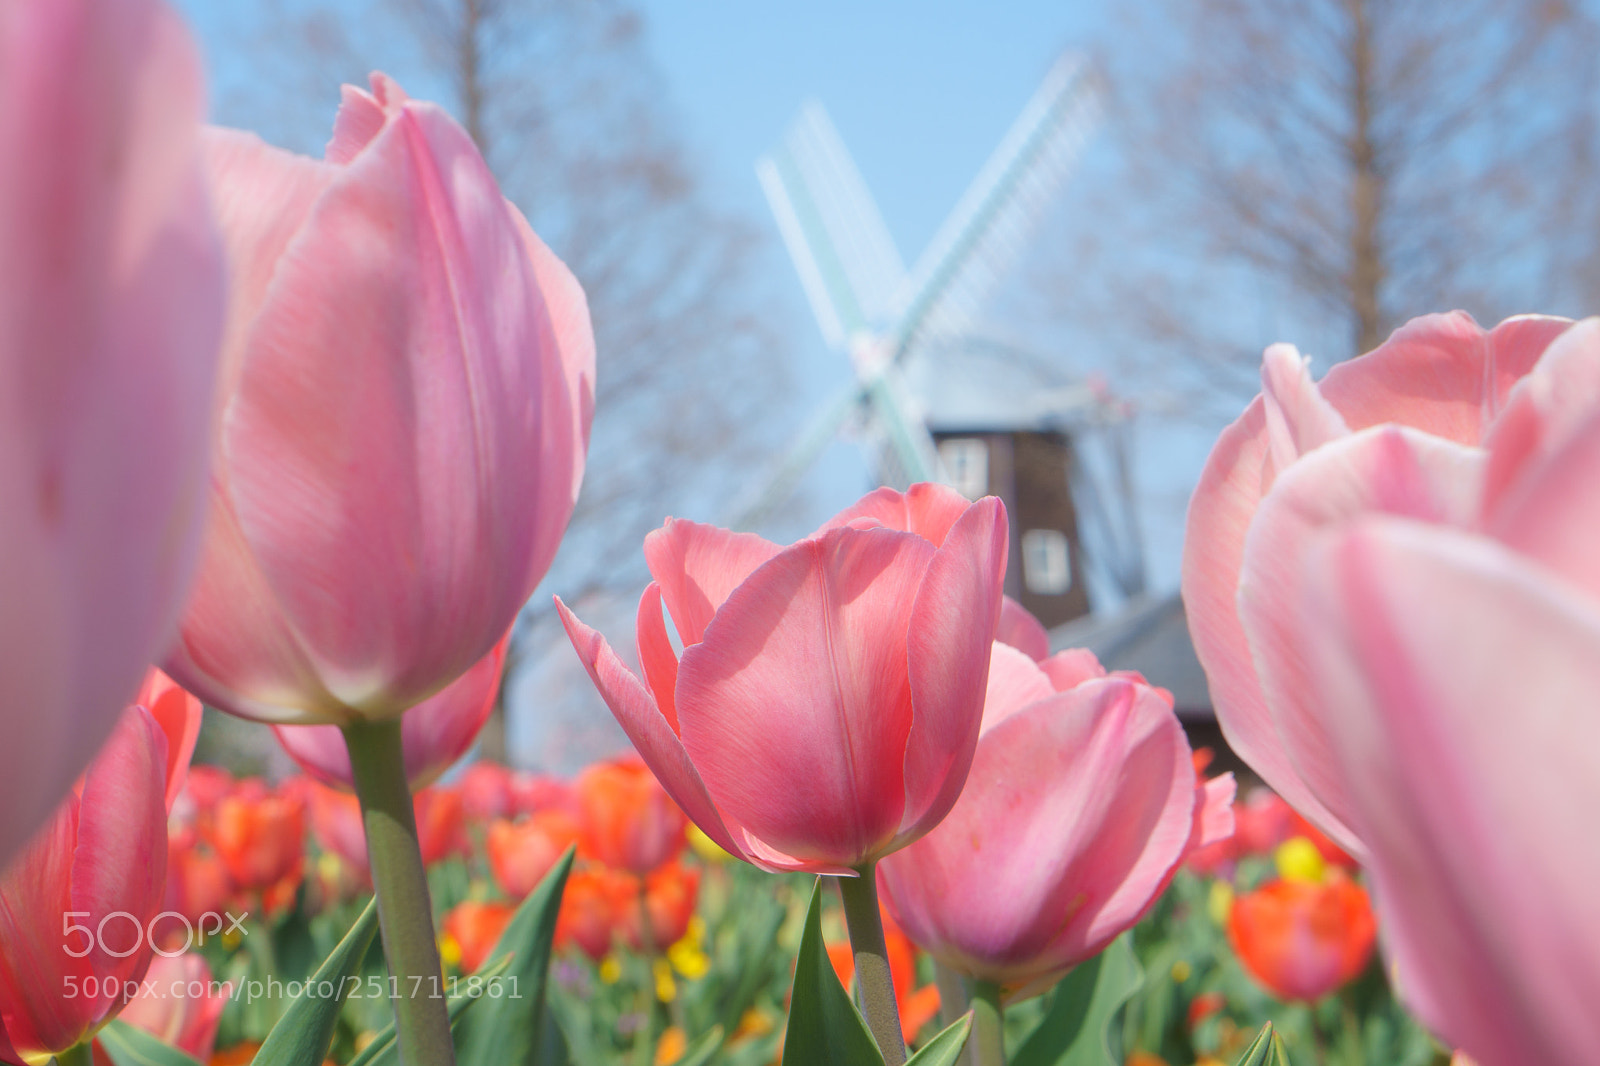 Sony a6500 sample photo. Tulip and windmill photography